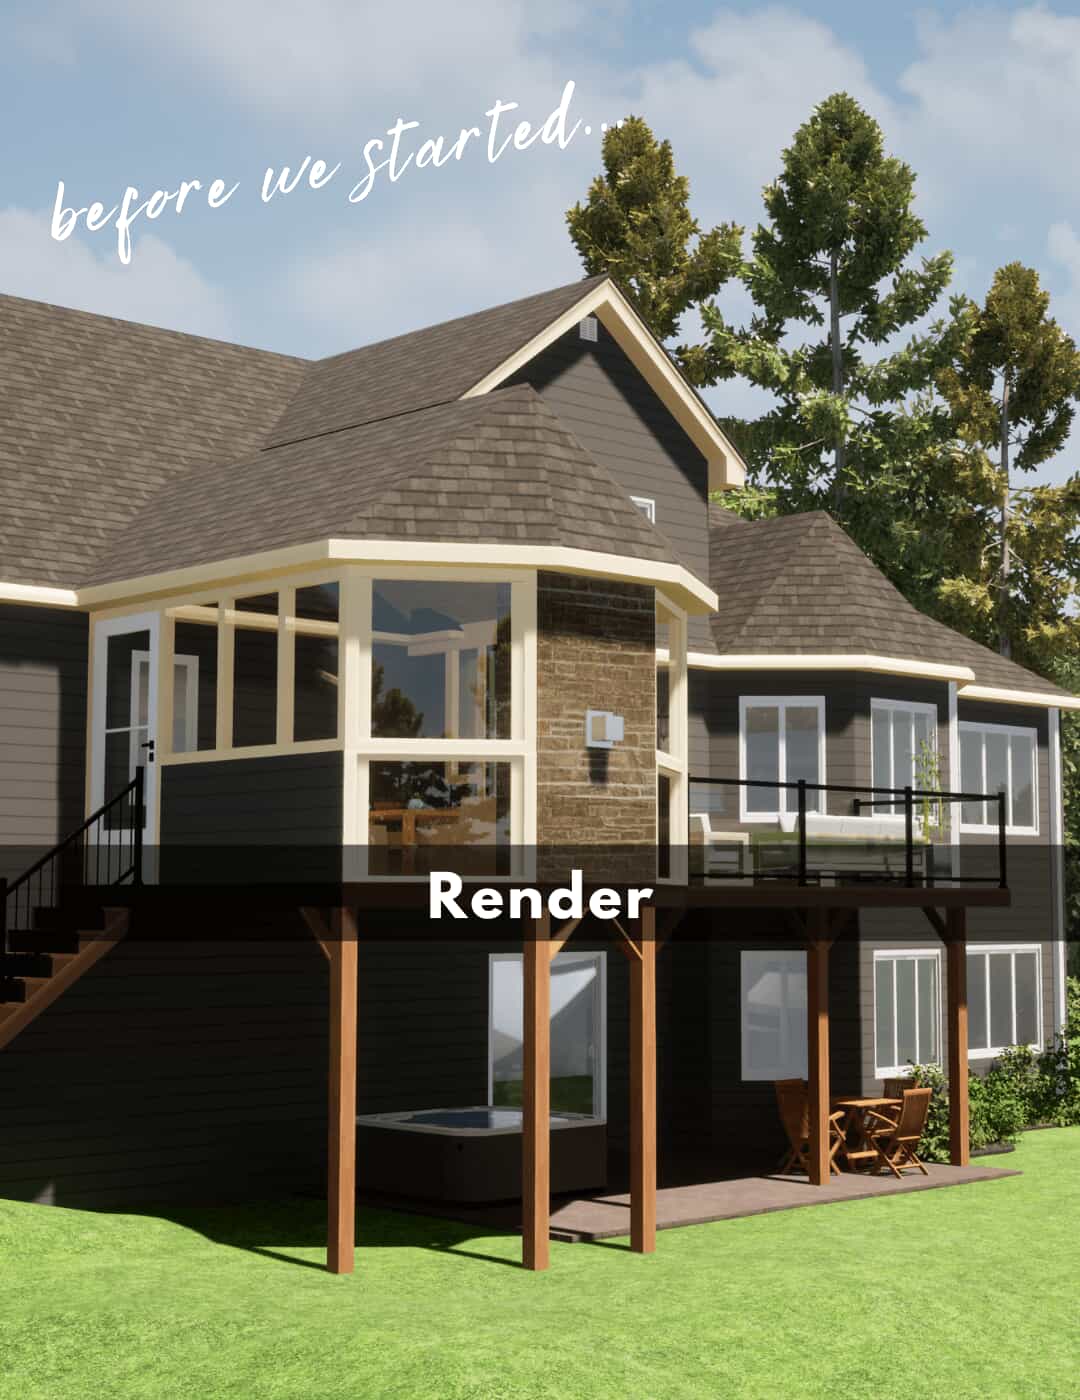 Render design of the screened room and adjacent deck, from outside, before we started